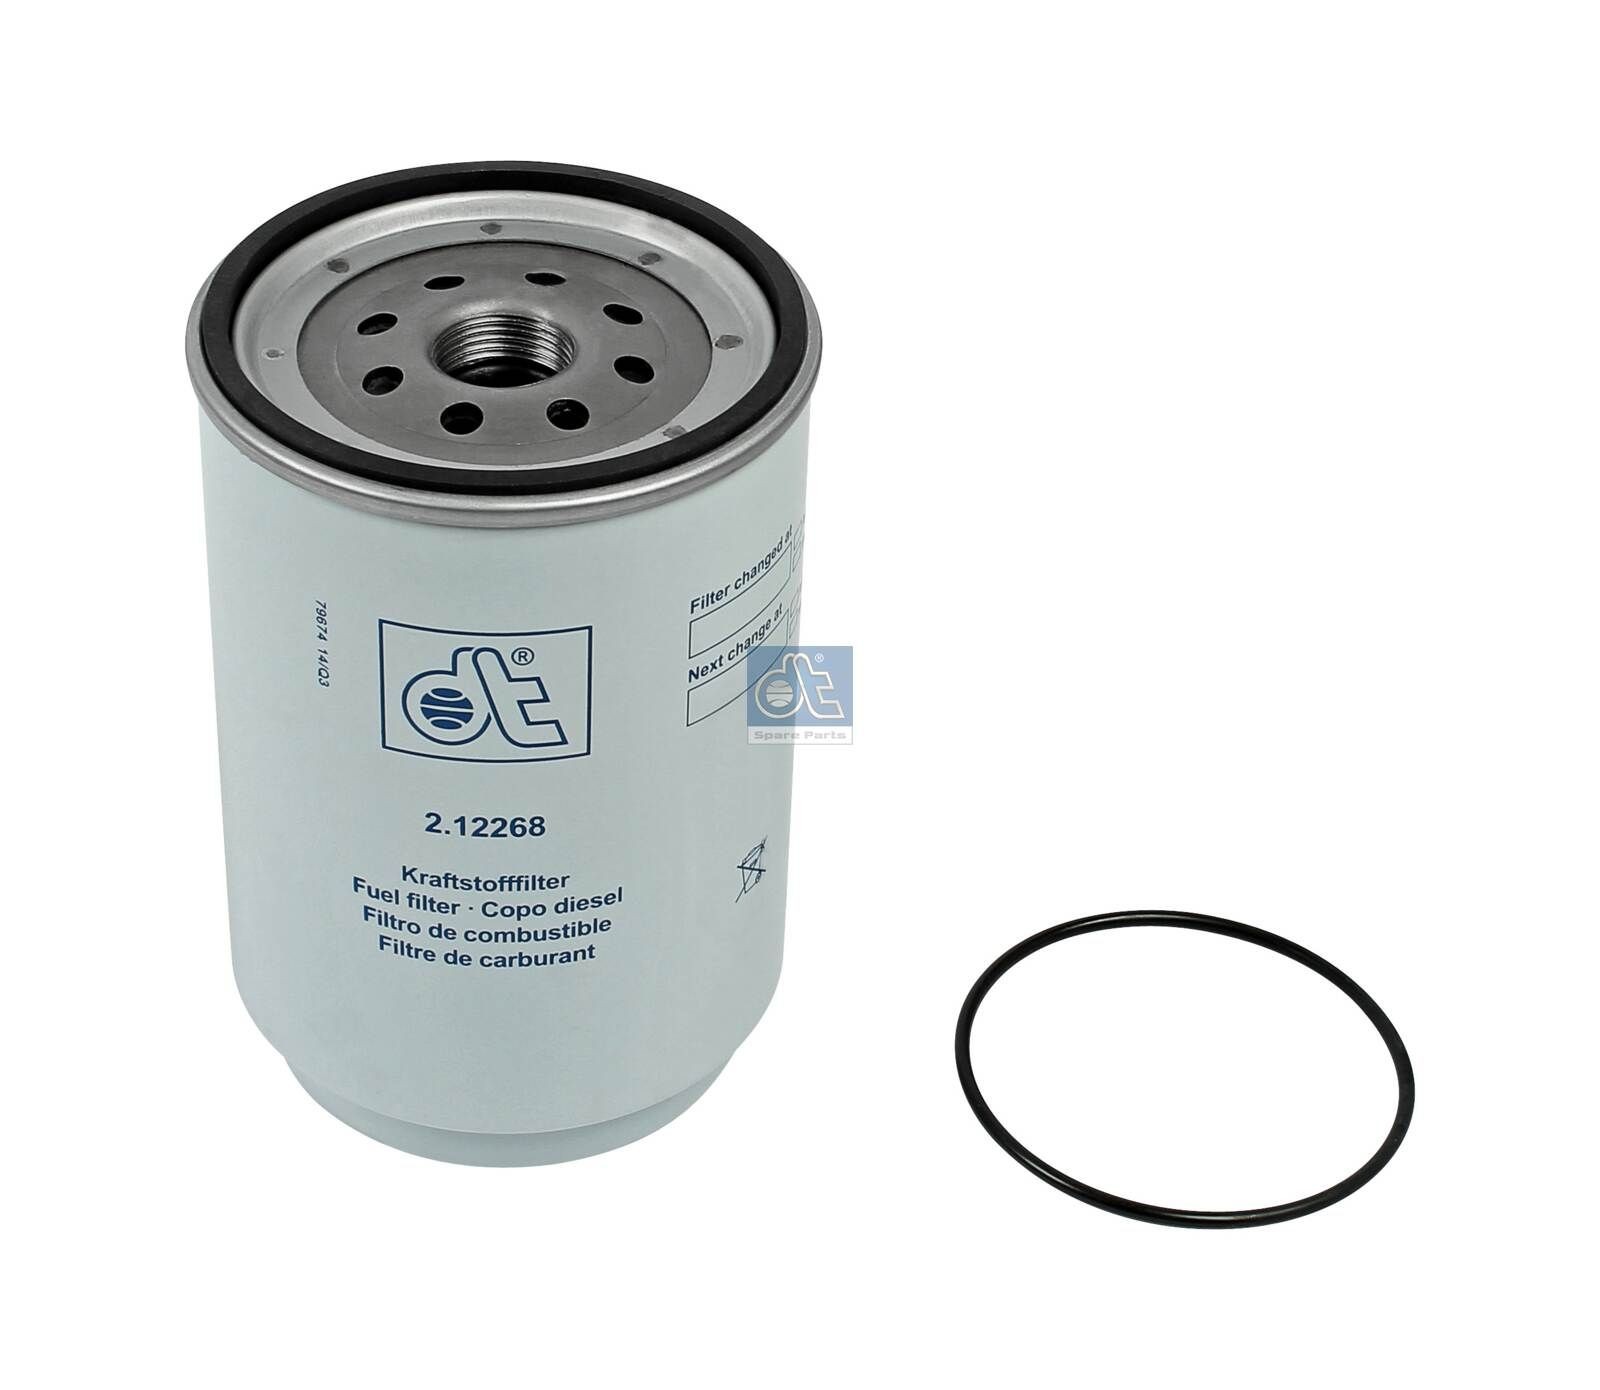 WK 11 001 x DT Spare Parts 2.12268 Fuel filter 1535381